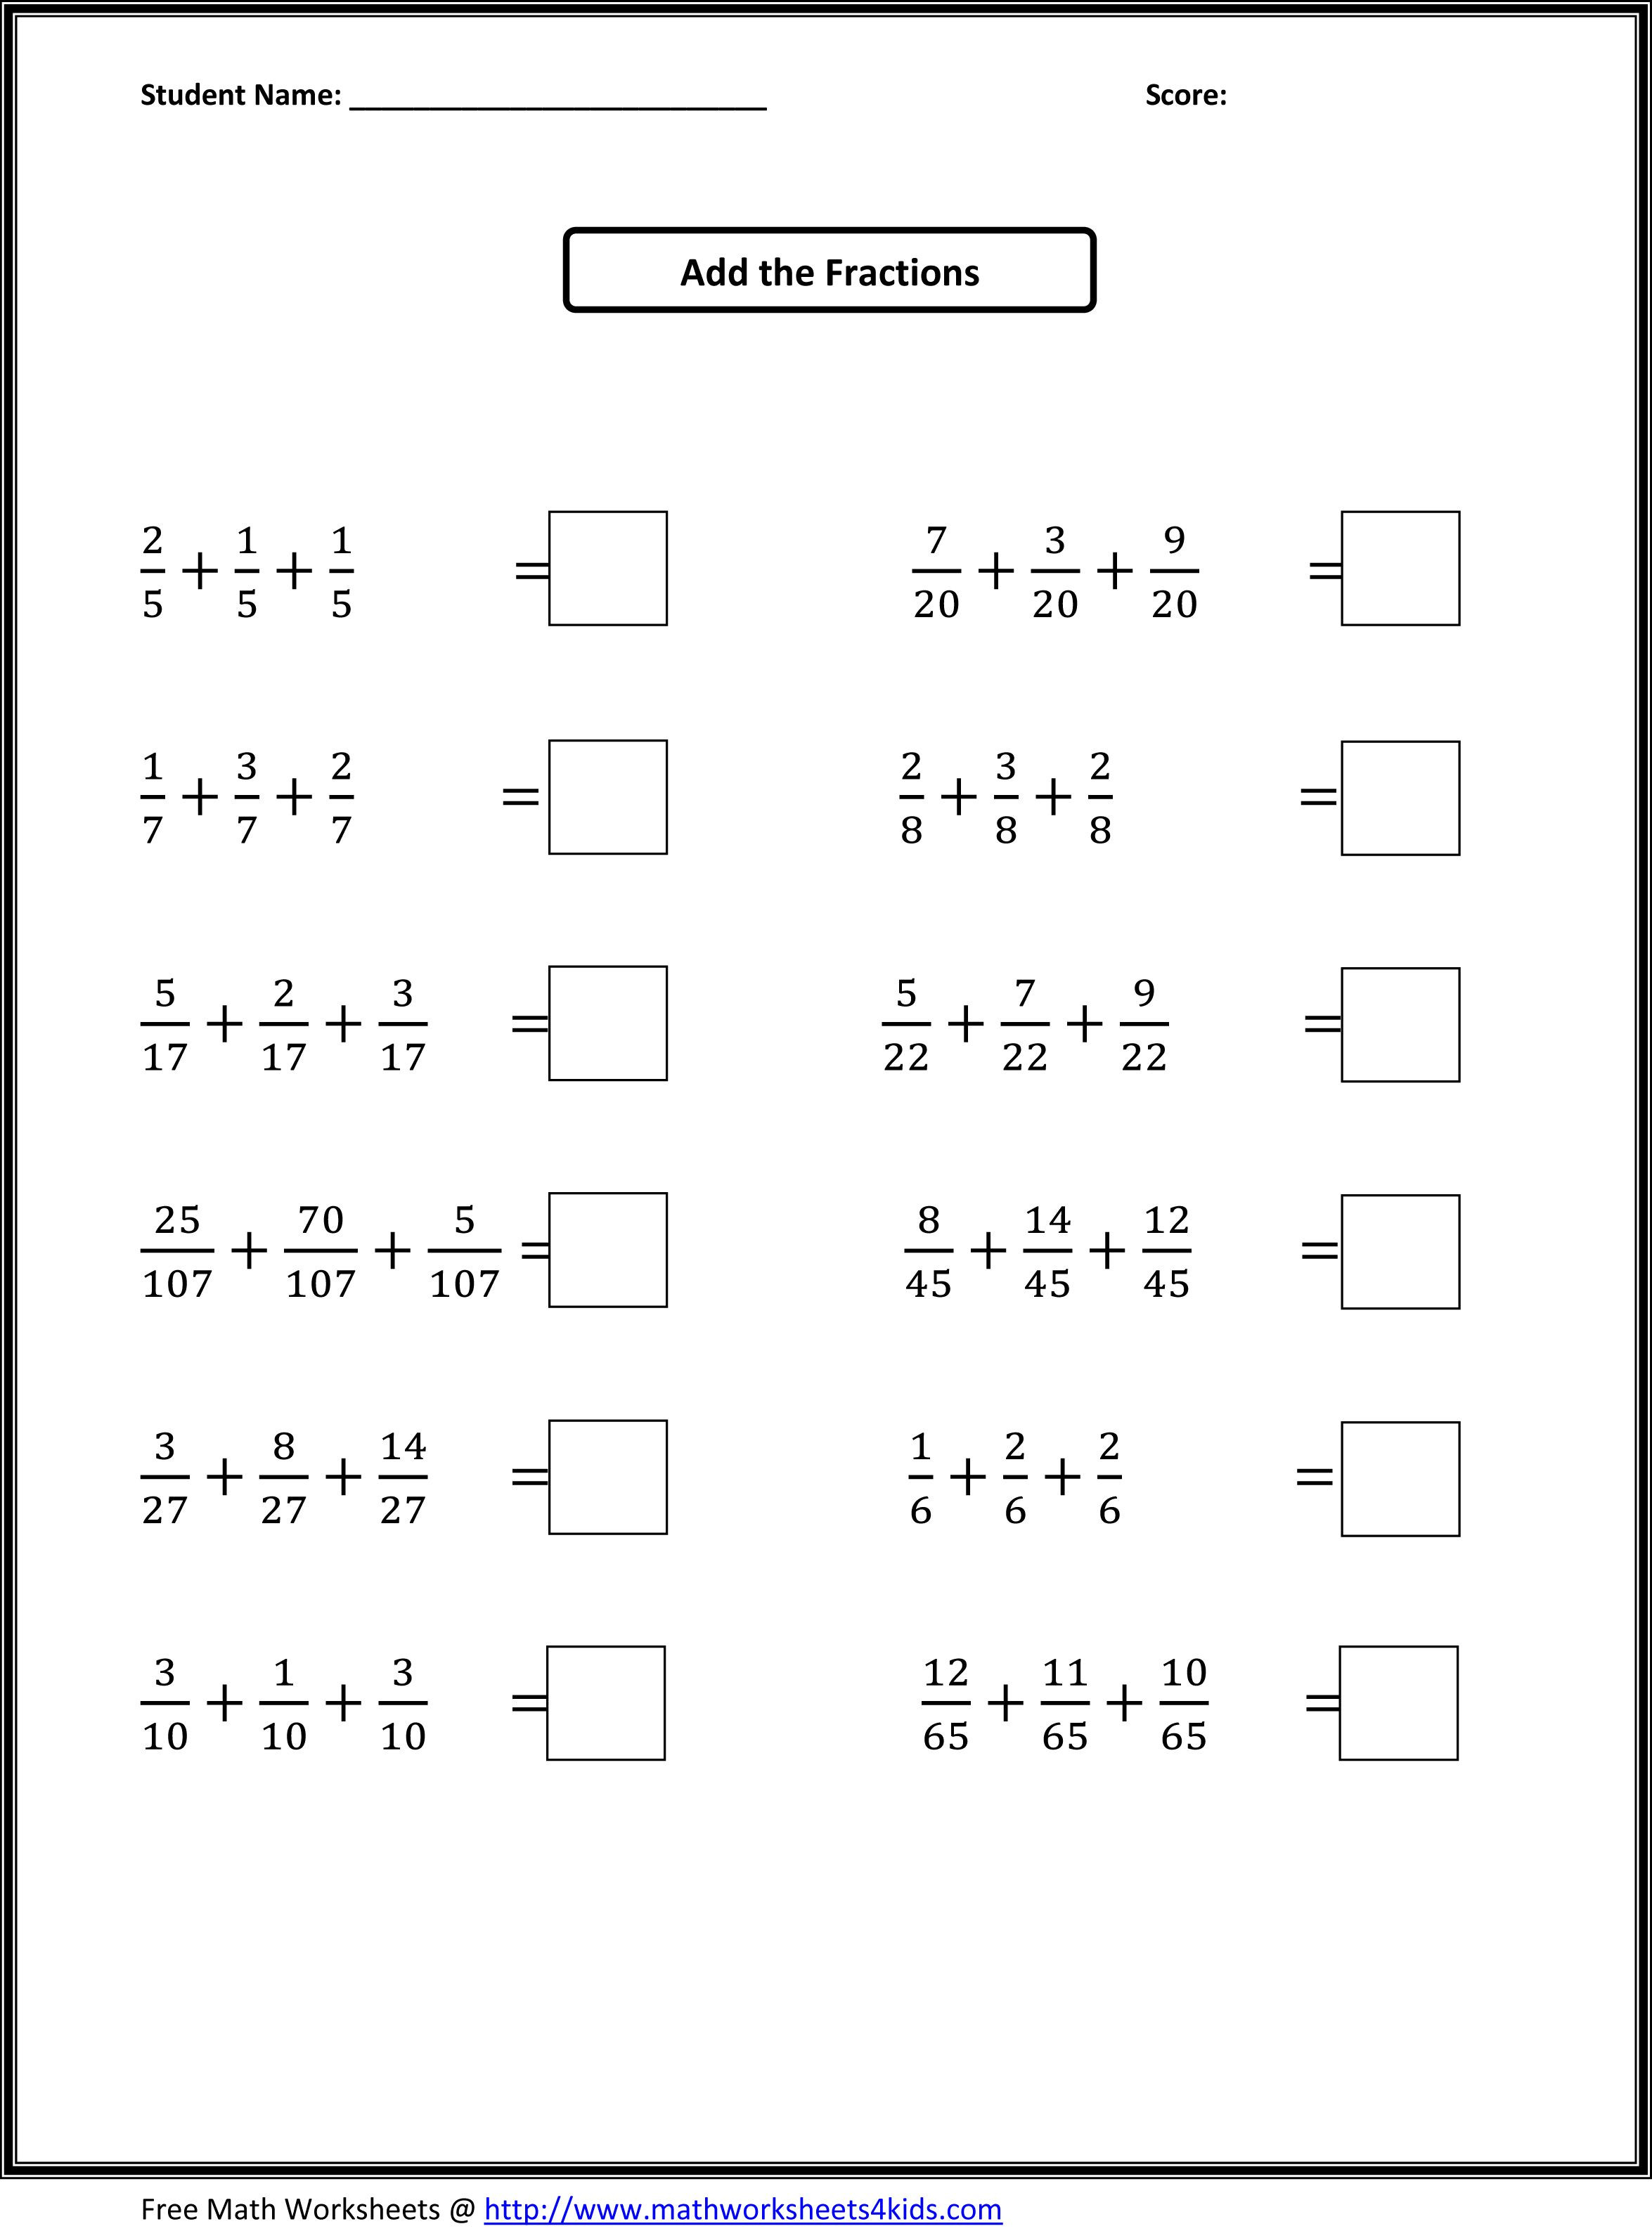 Multiplication Worksheets Grade 4 Printable Worksheets by Grade Level and by Skill